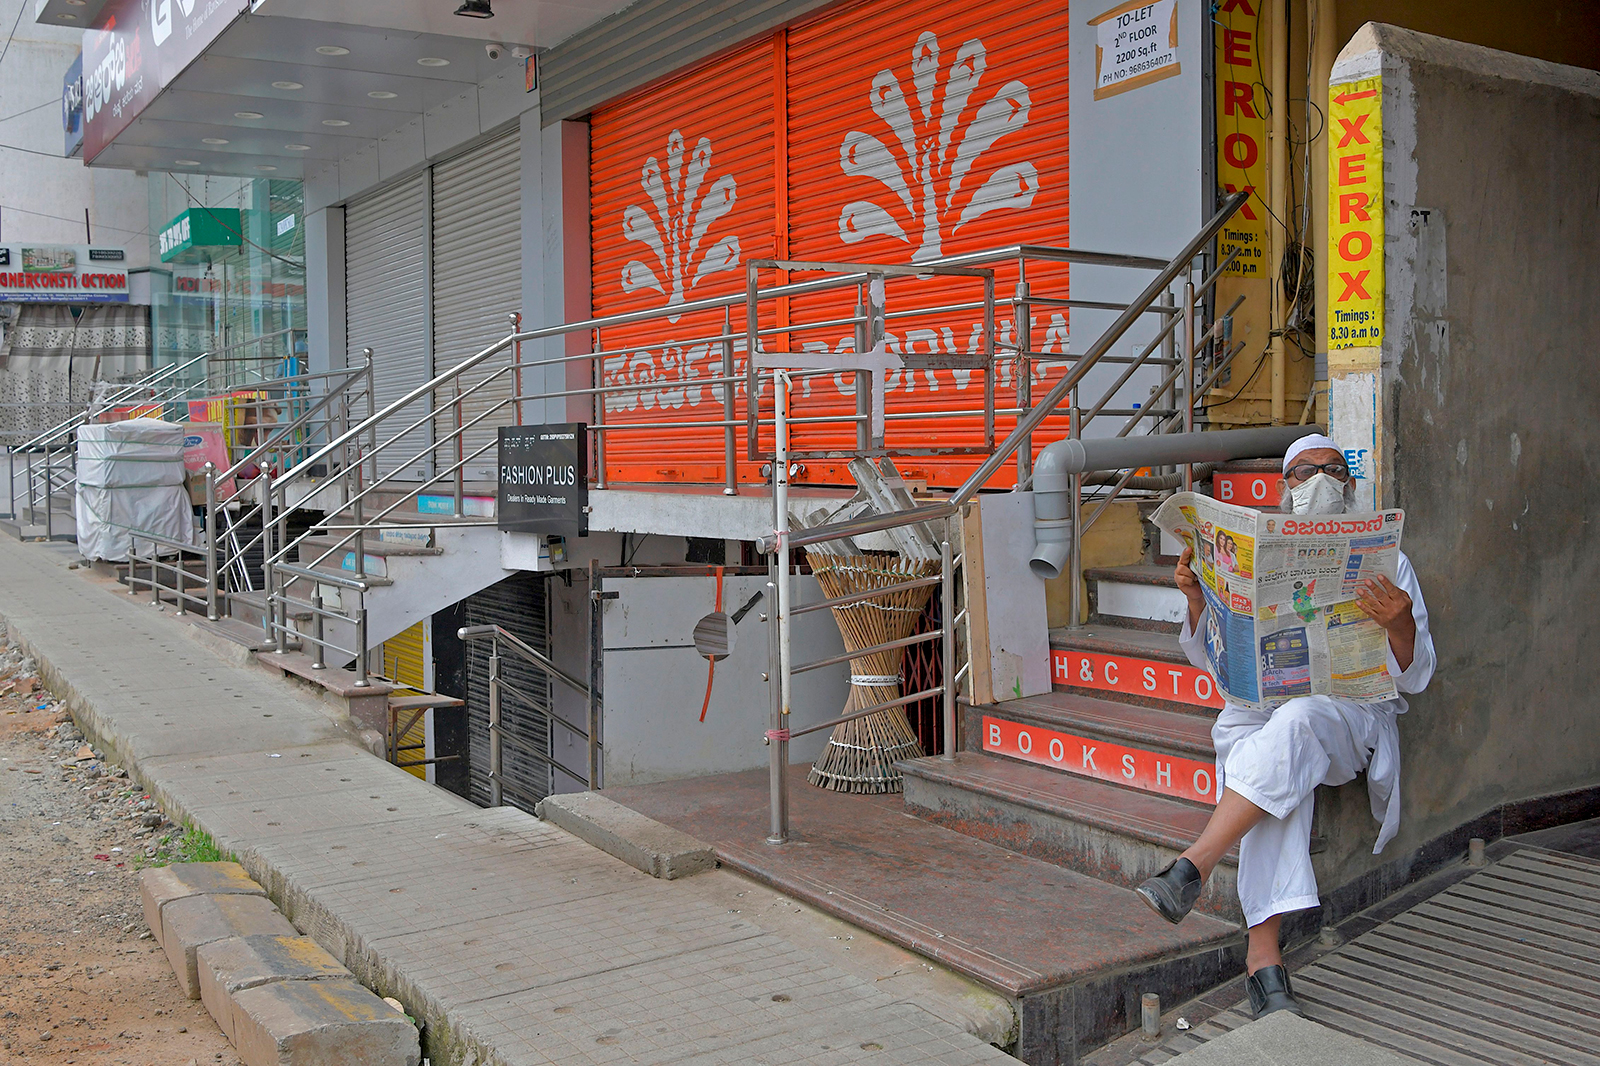 A man reads a newspaper while sitting in front of closed shops in a commercial area in Bangalore, India on July 15.